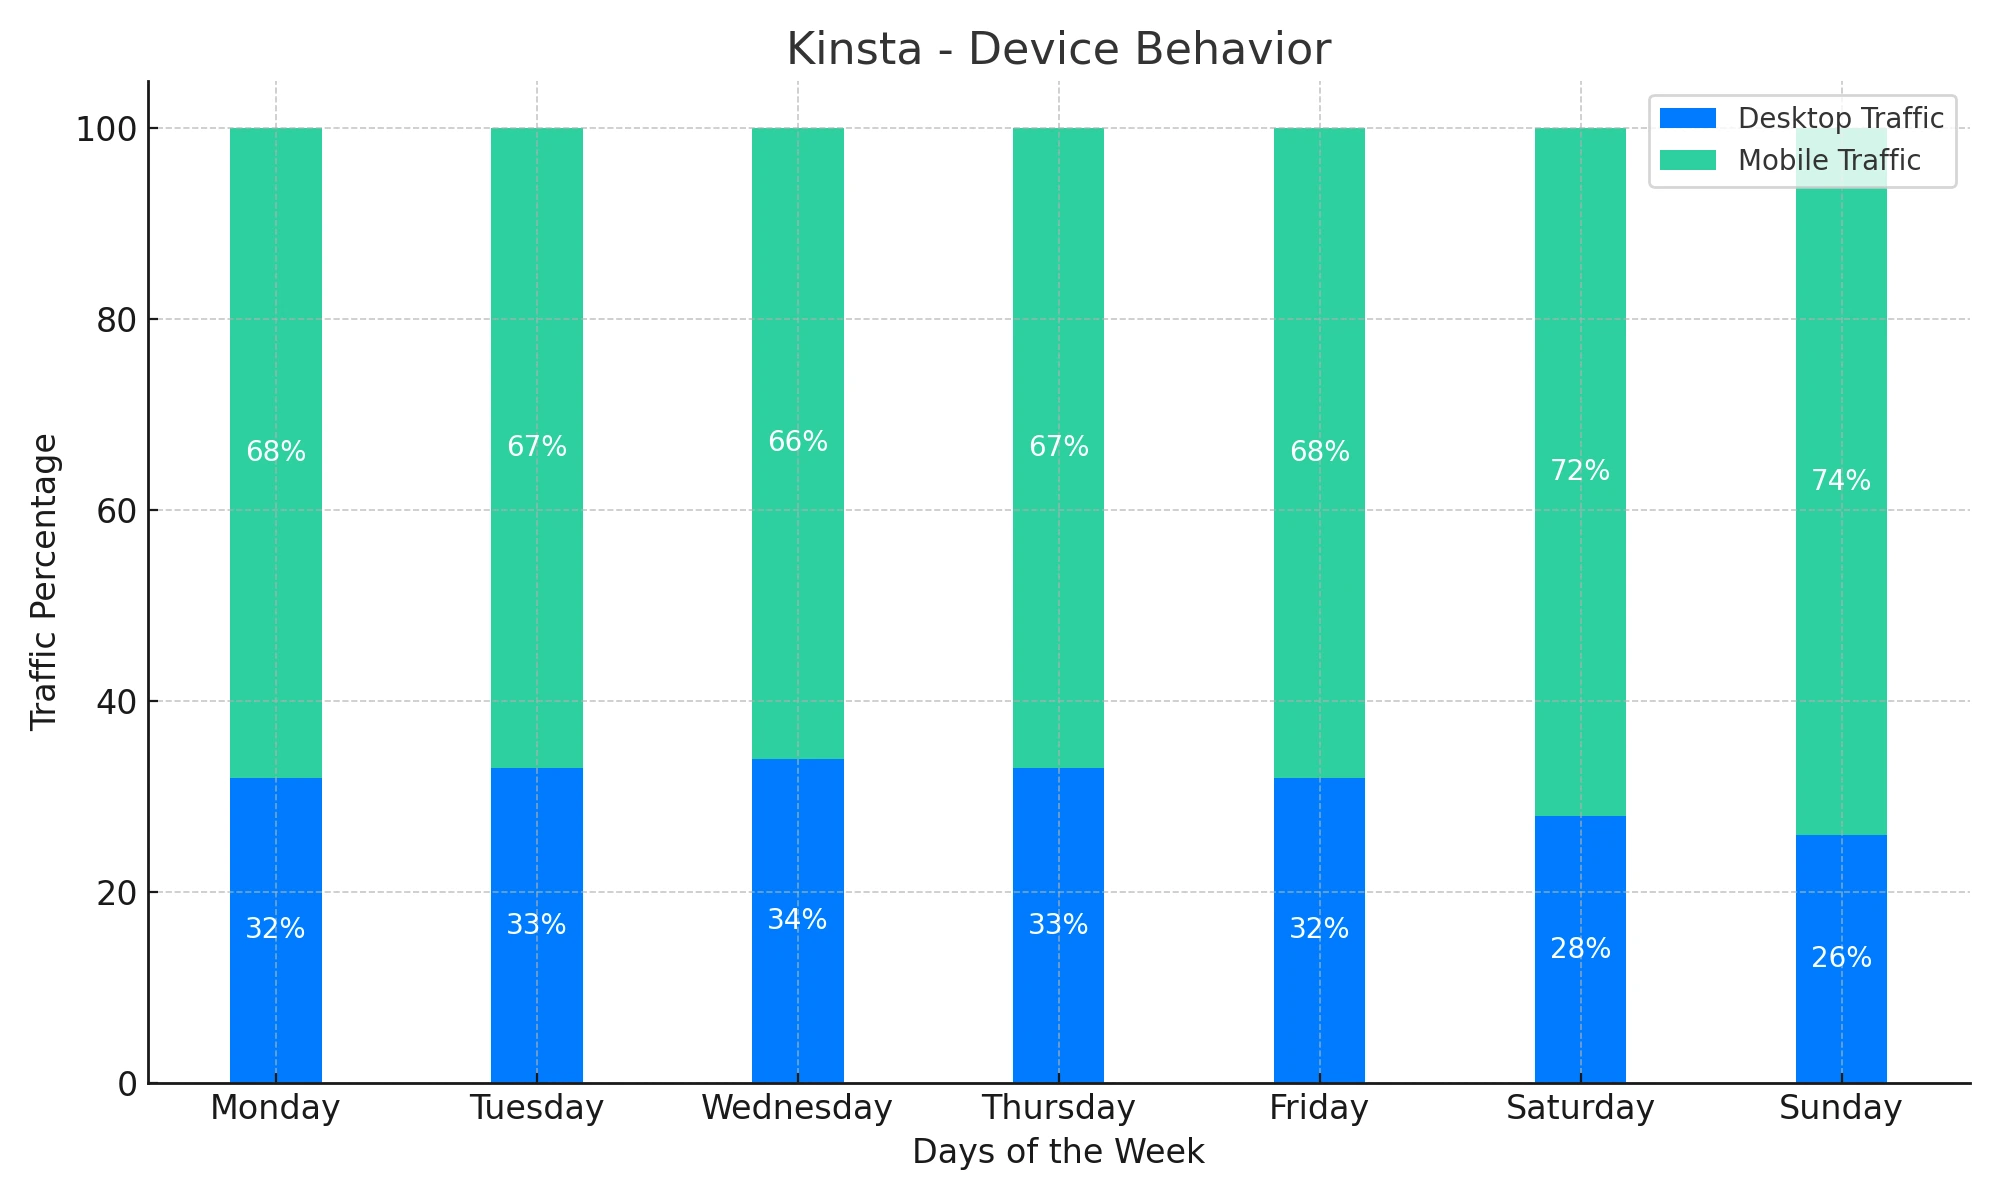 Bar chart displaying the percentage of desktop and mobile traffic for each day of the week according to Kinsta data. Desktop traffic is shown in blue, and mobile traffic is in green.